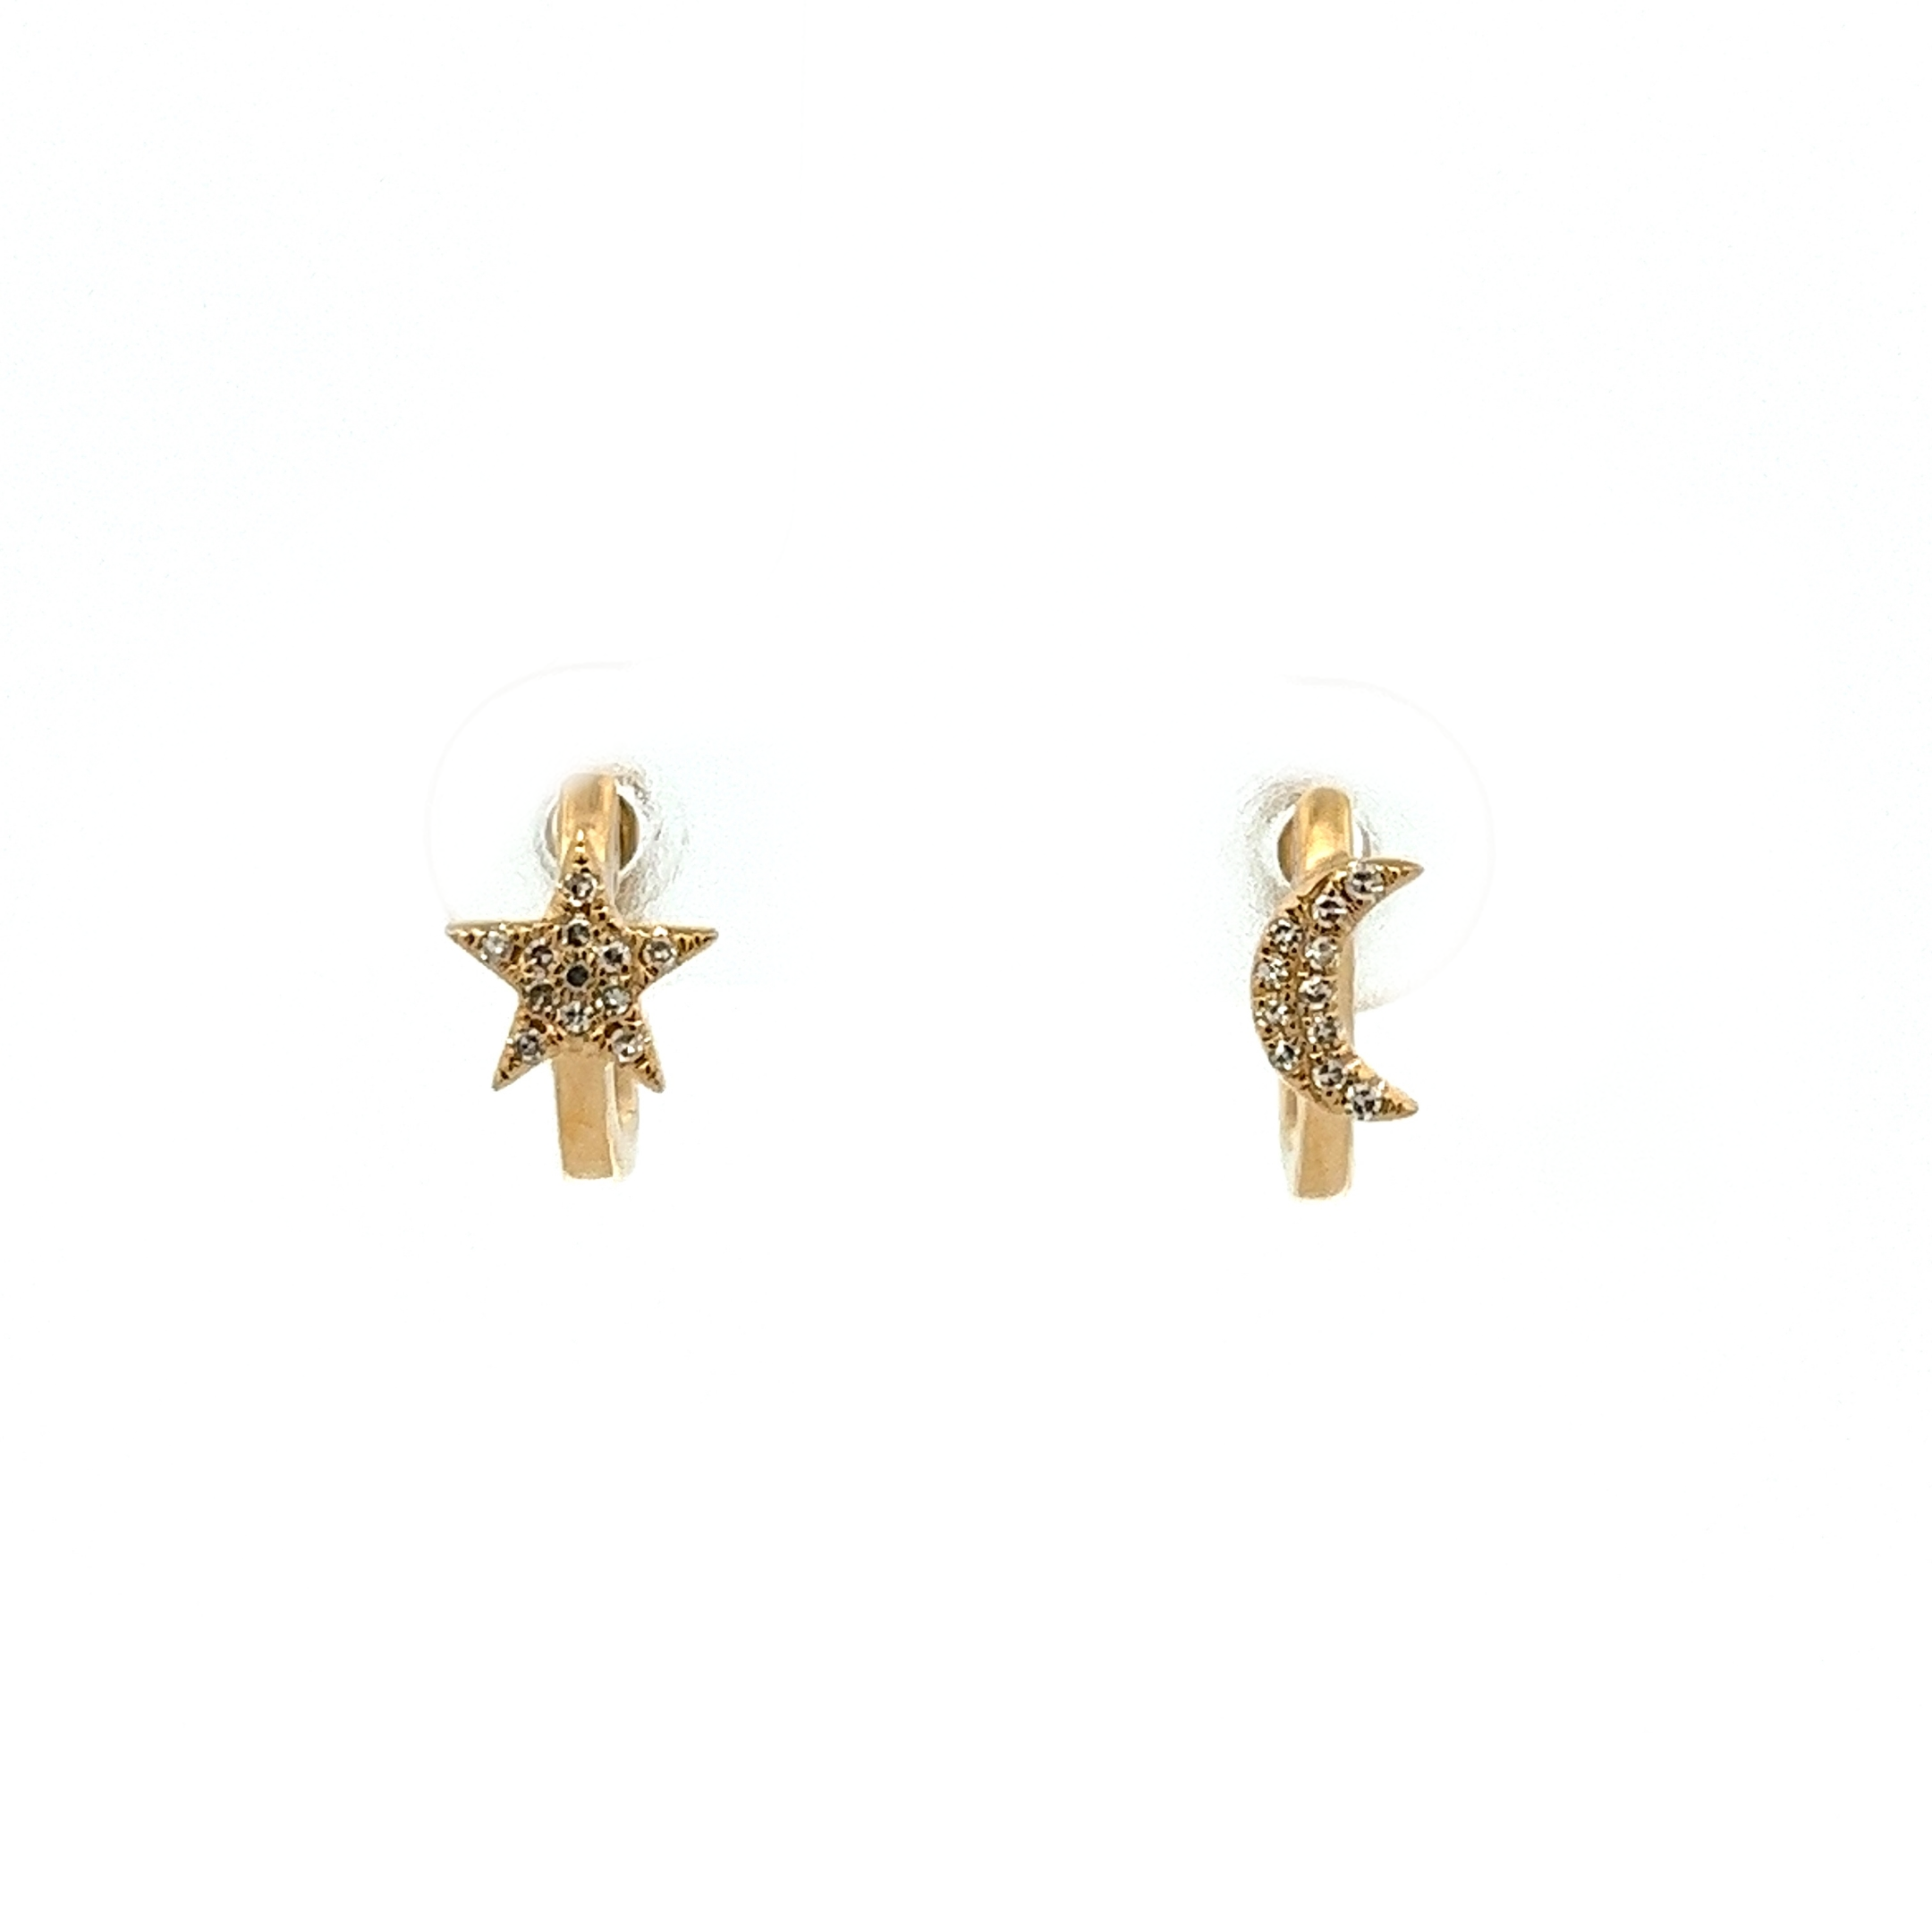 14K GOLD STAR AND MOON EARRINGS